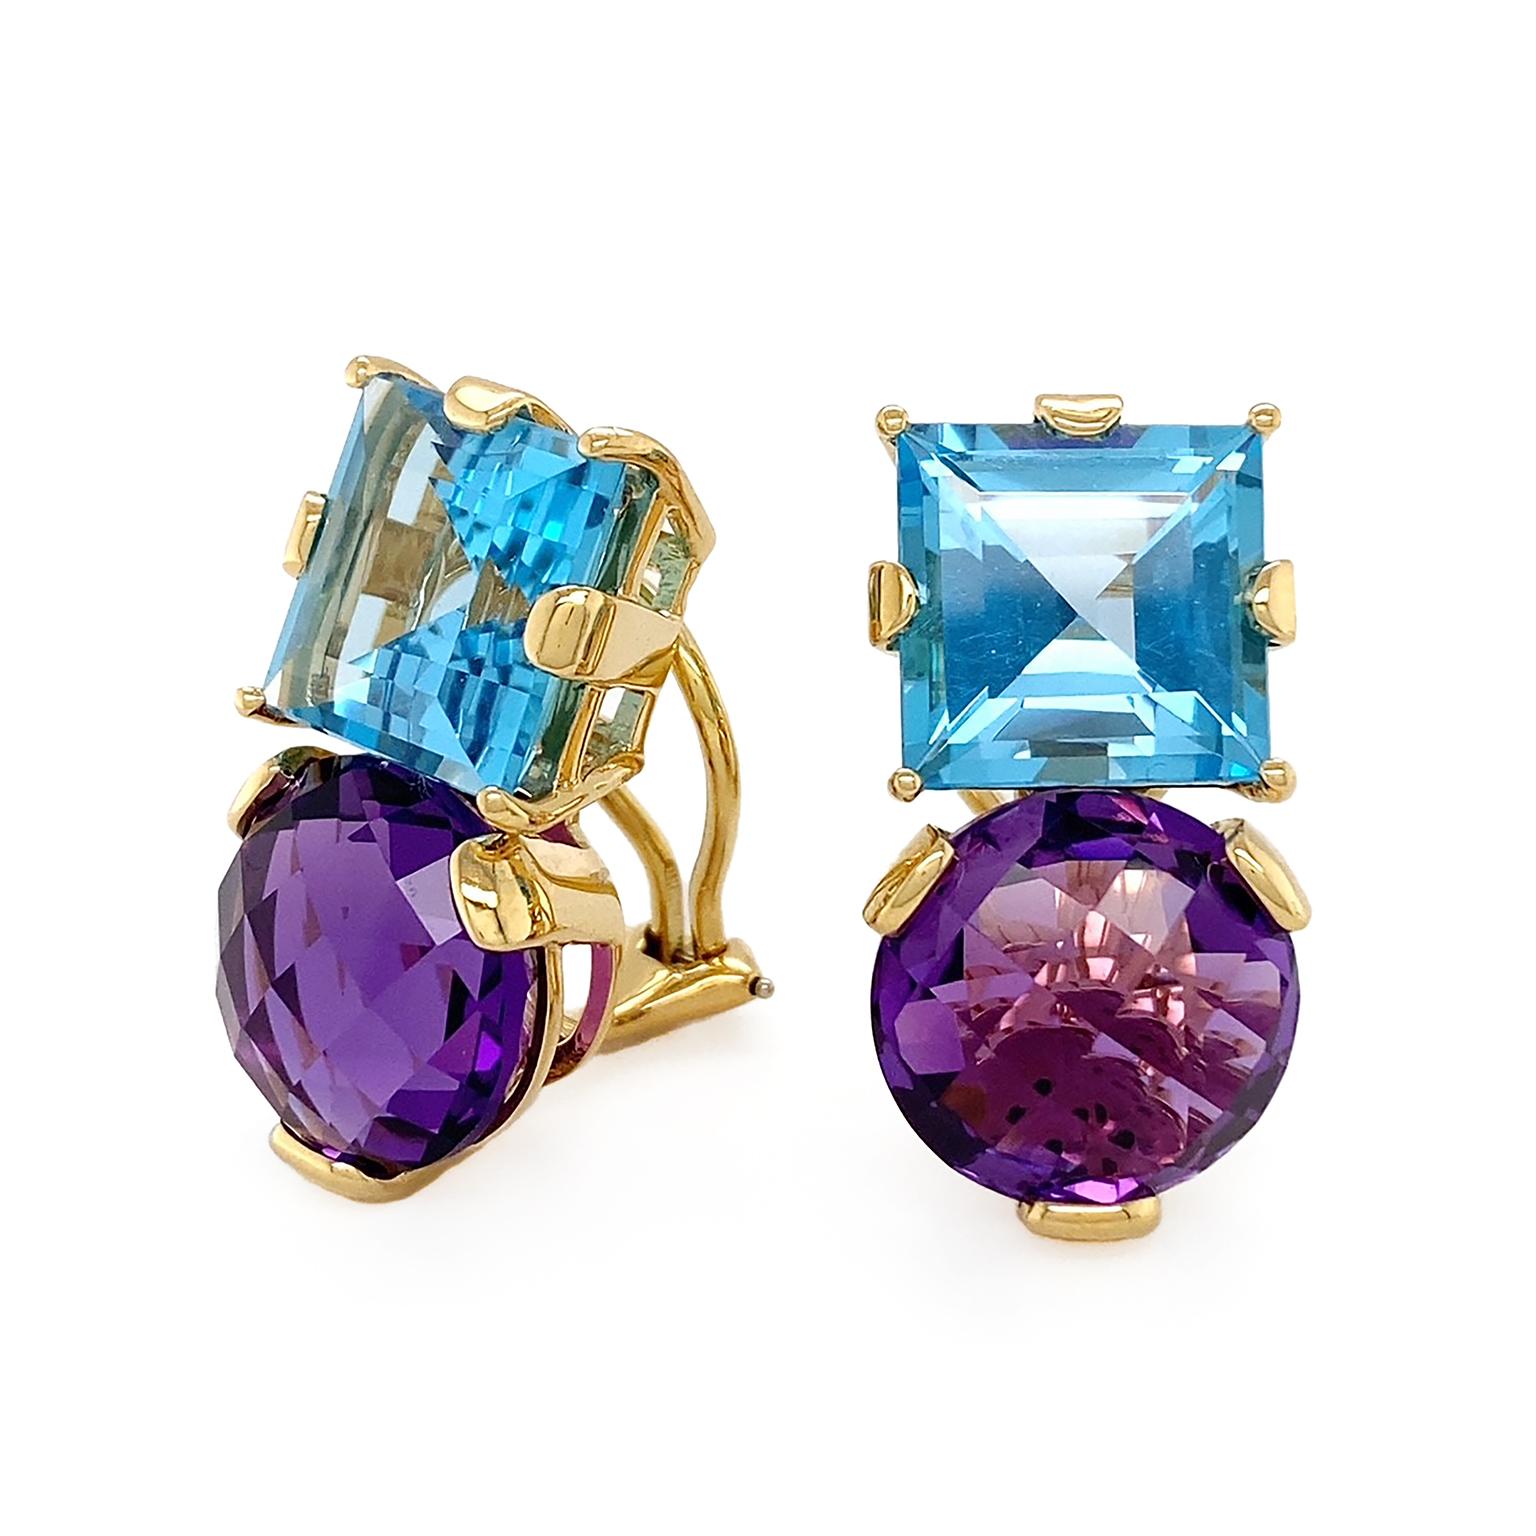 Complementary hued jewels coruscate. A square cut of flickering blue topaz begins the earrings. Beneath is a round checkerboard cut of amethyst, lifting deep plum shades. 18k yellow gold secures the gems. The total weight is 18.19 carats of blue